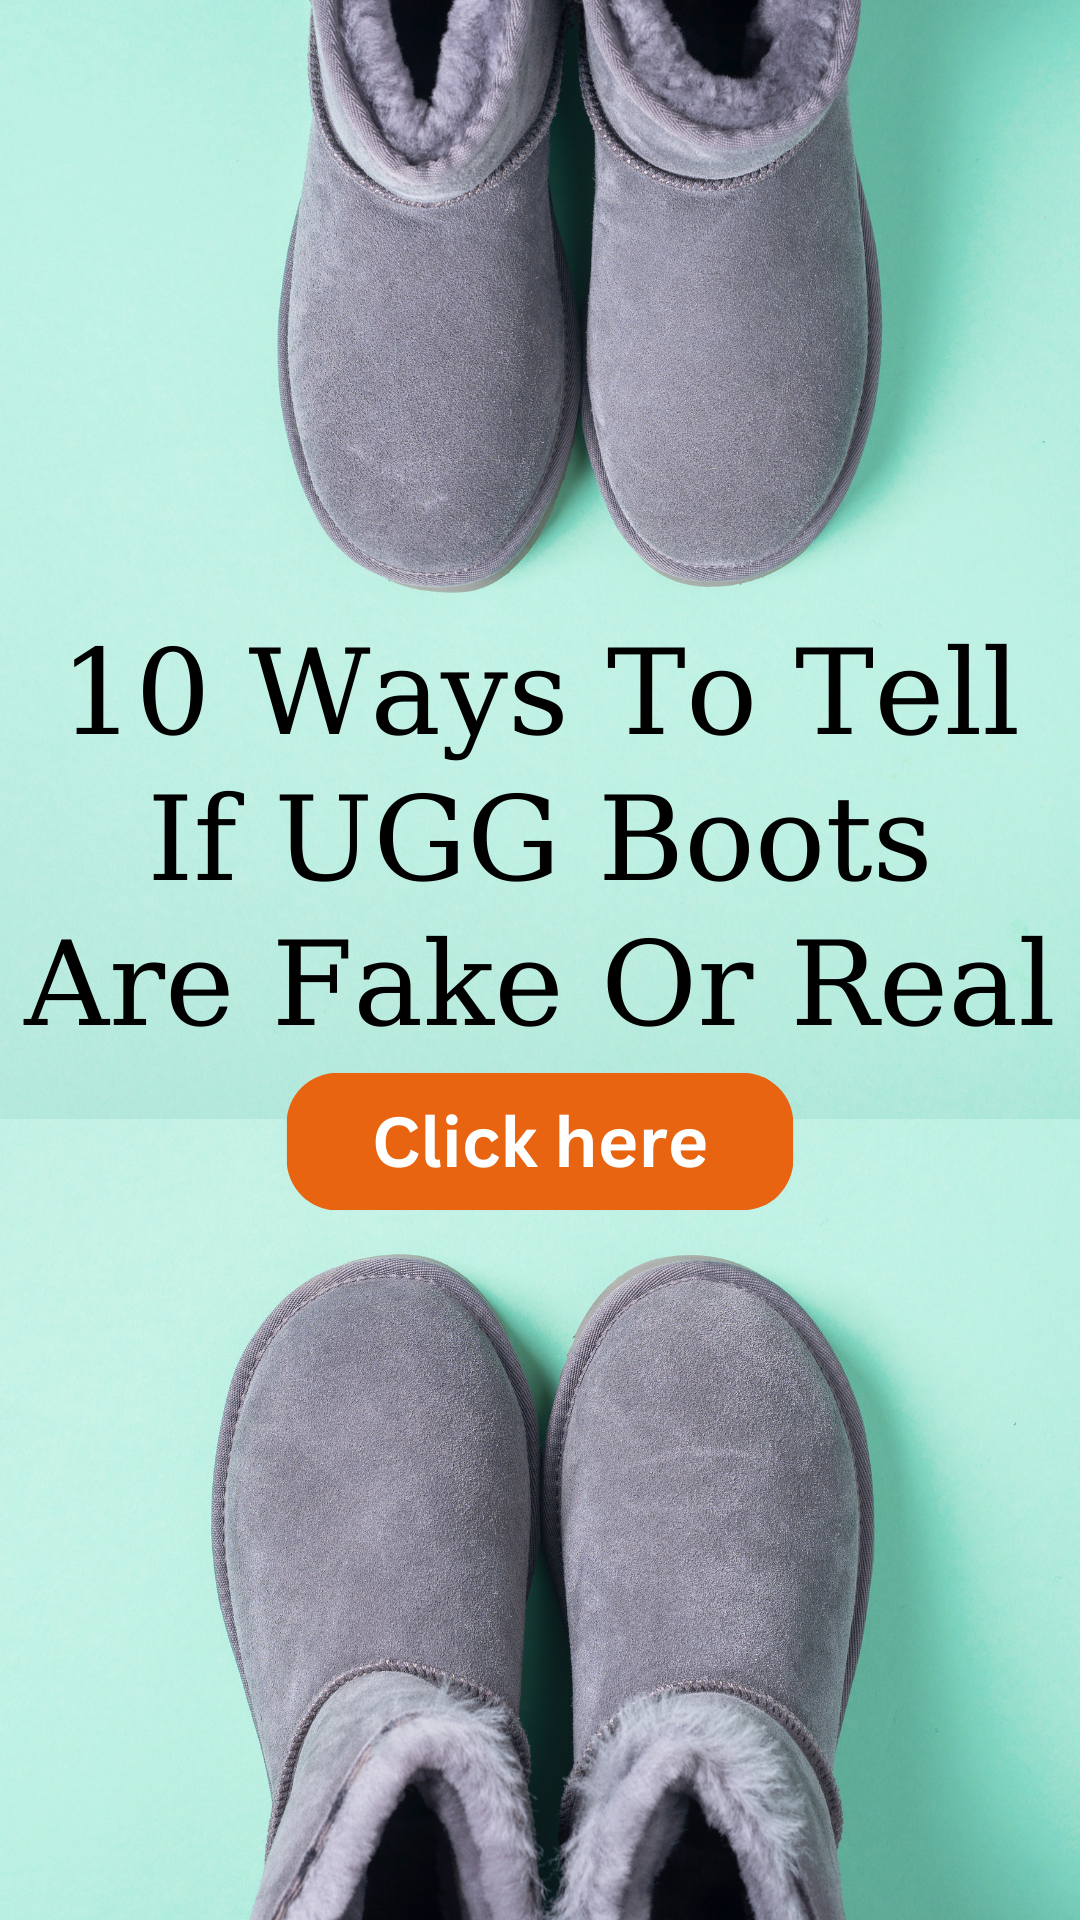 10 Ways To Tell If UGG Boots Are Fake Or Real